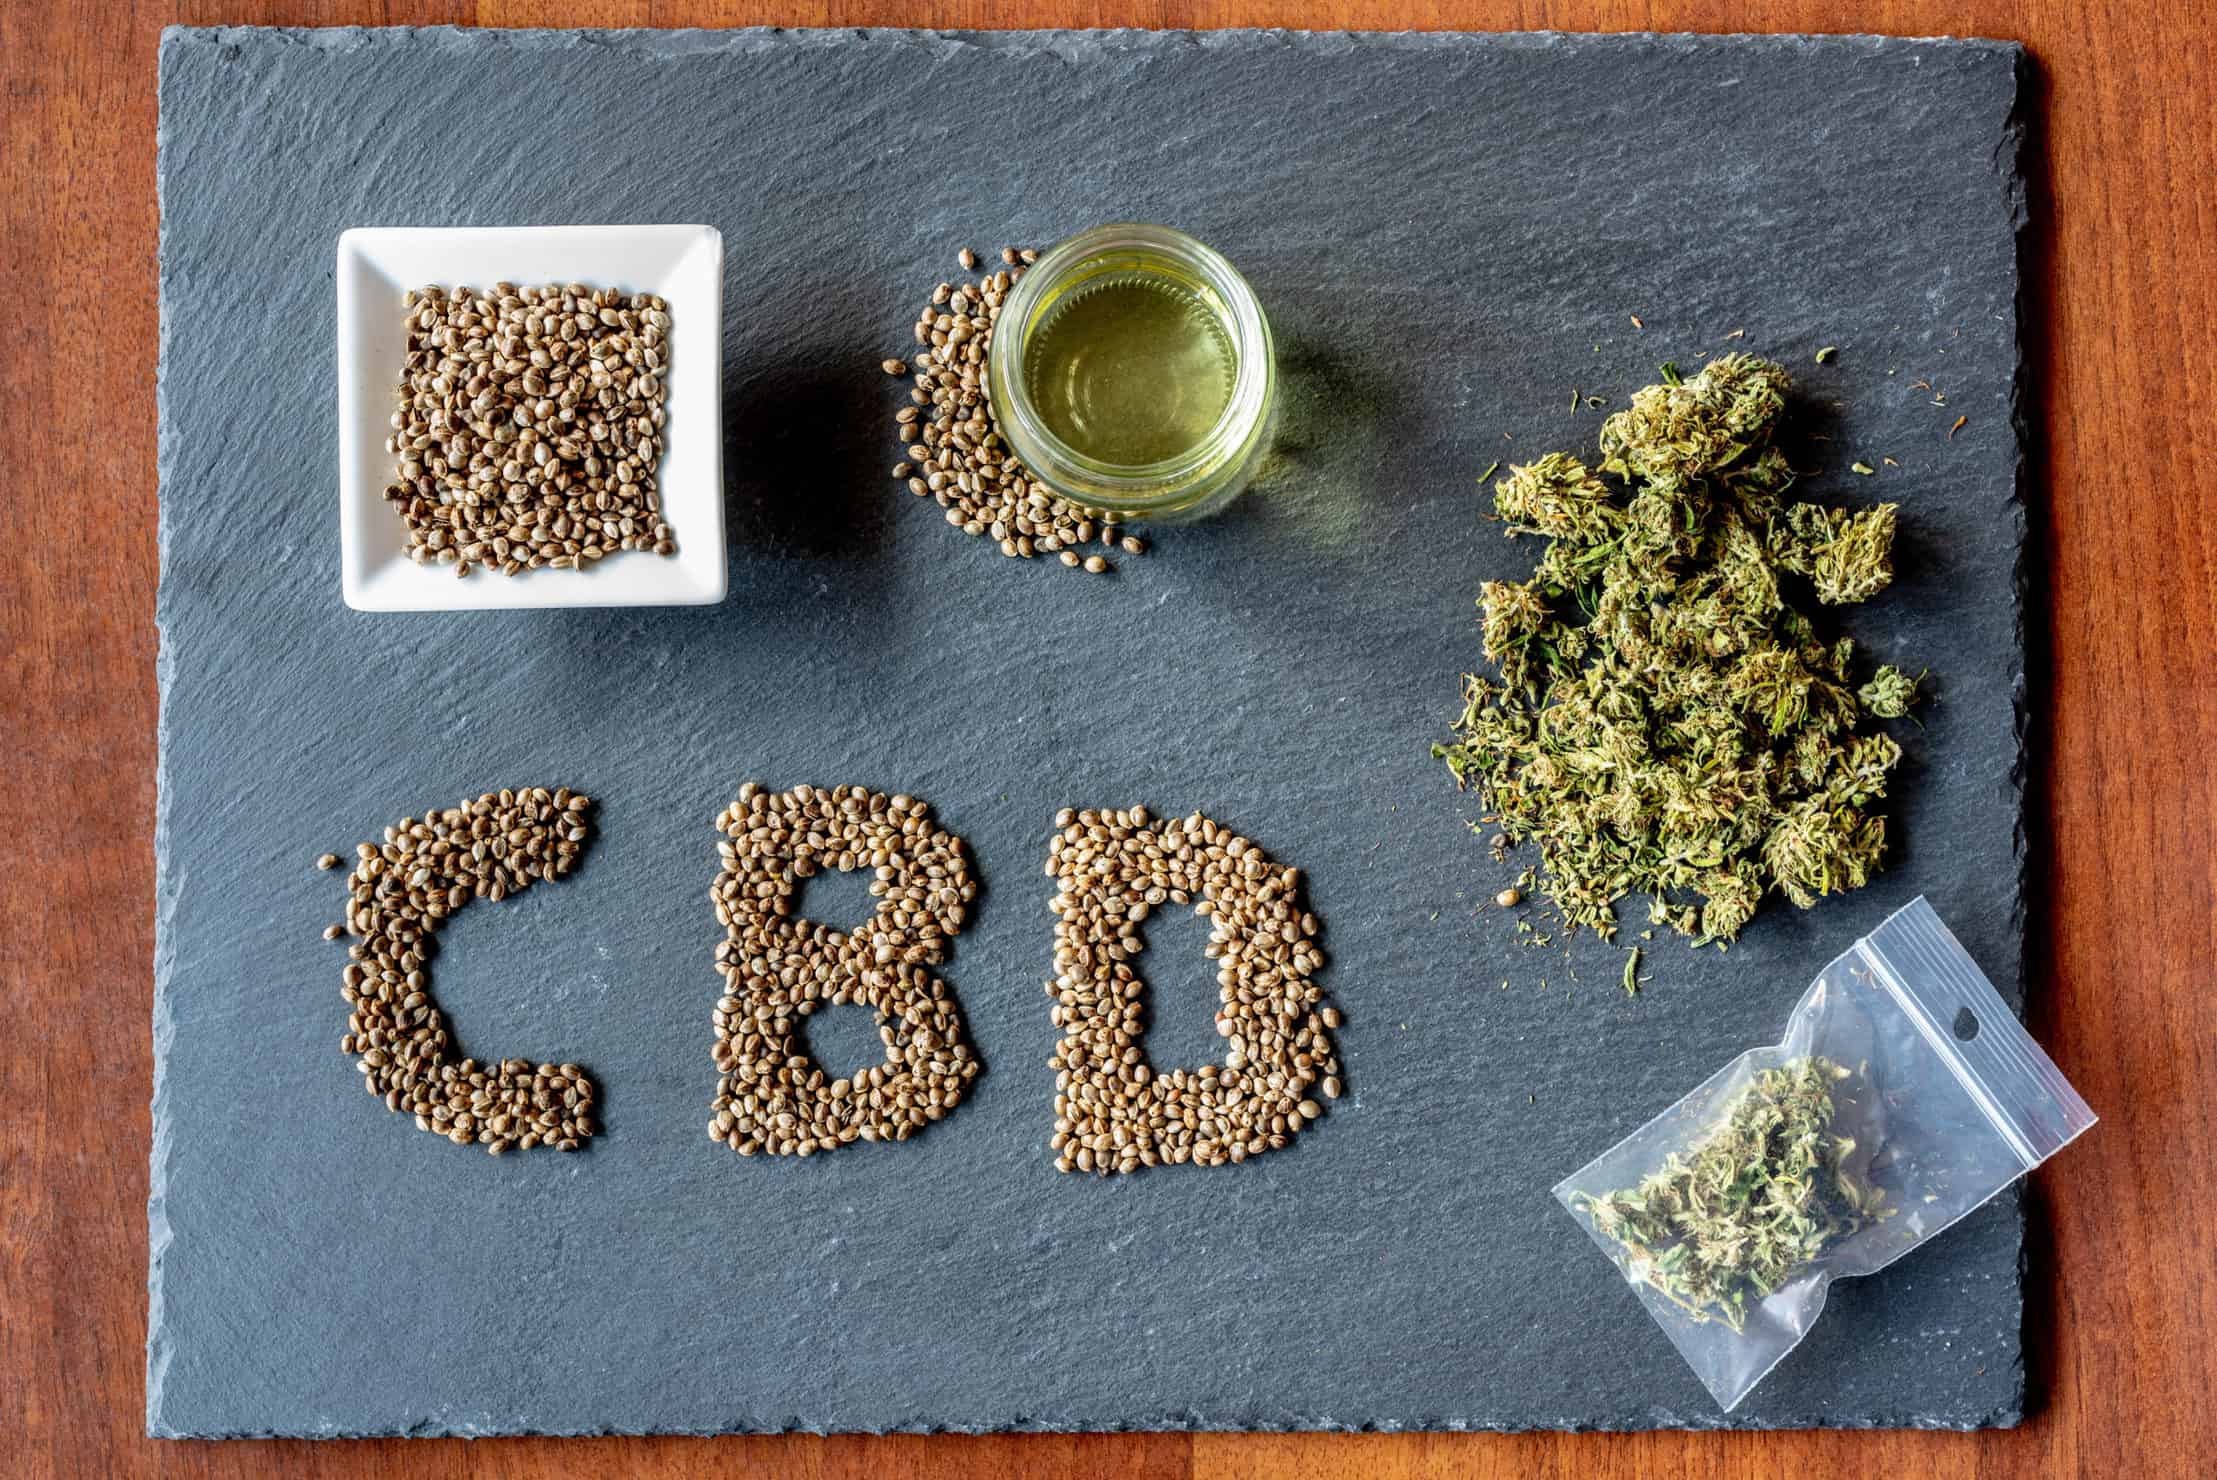 A short guide to water soluble CBD. CBD spelled out in seeds.